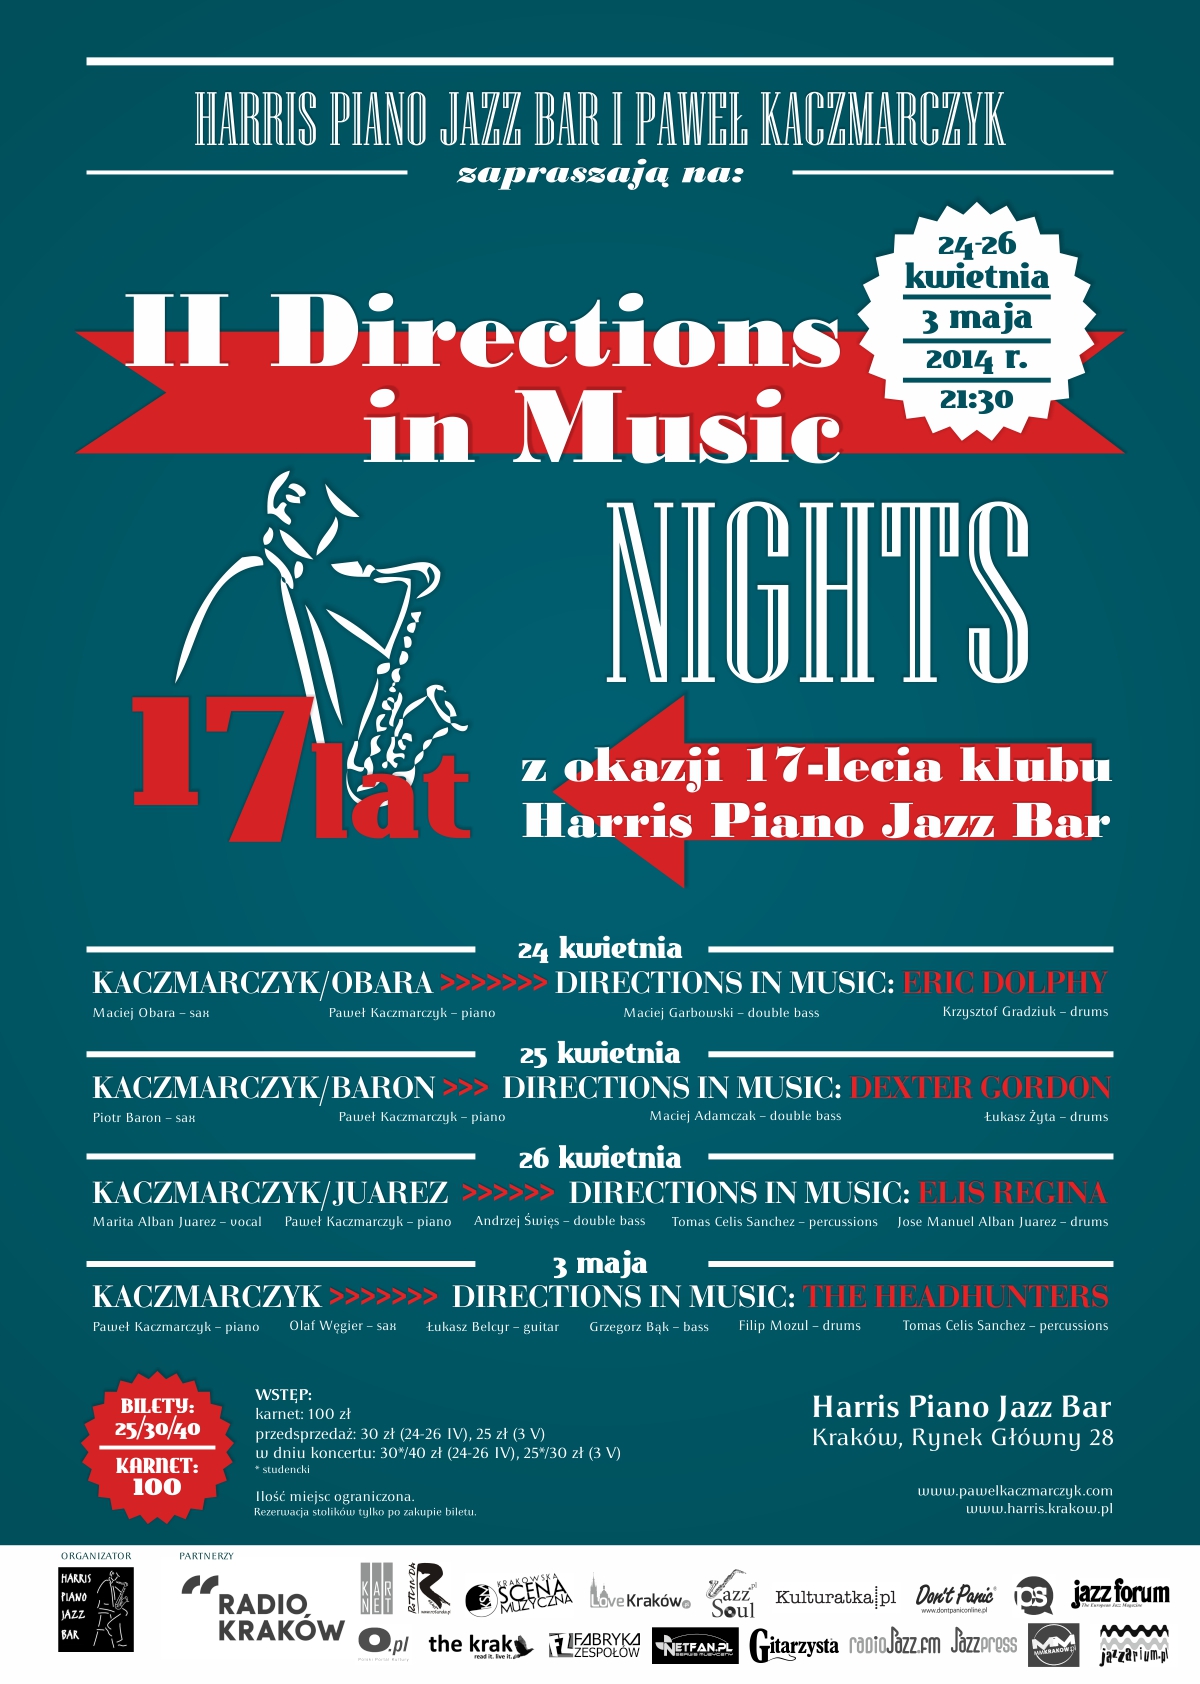 ii_directions_in_music_nights